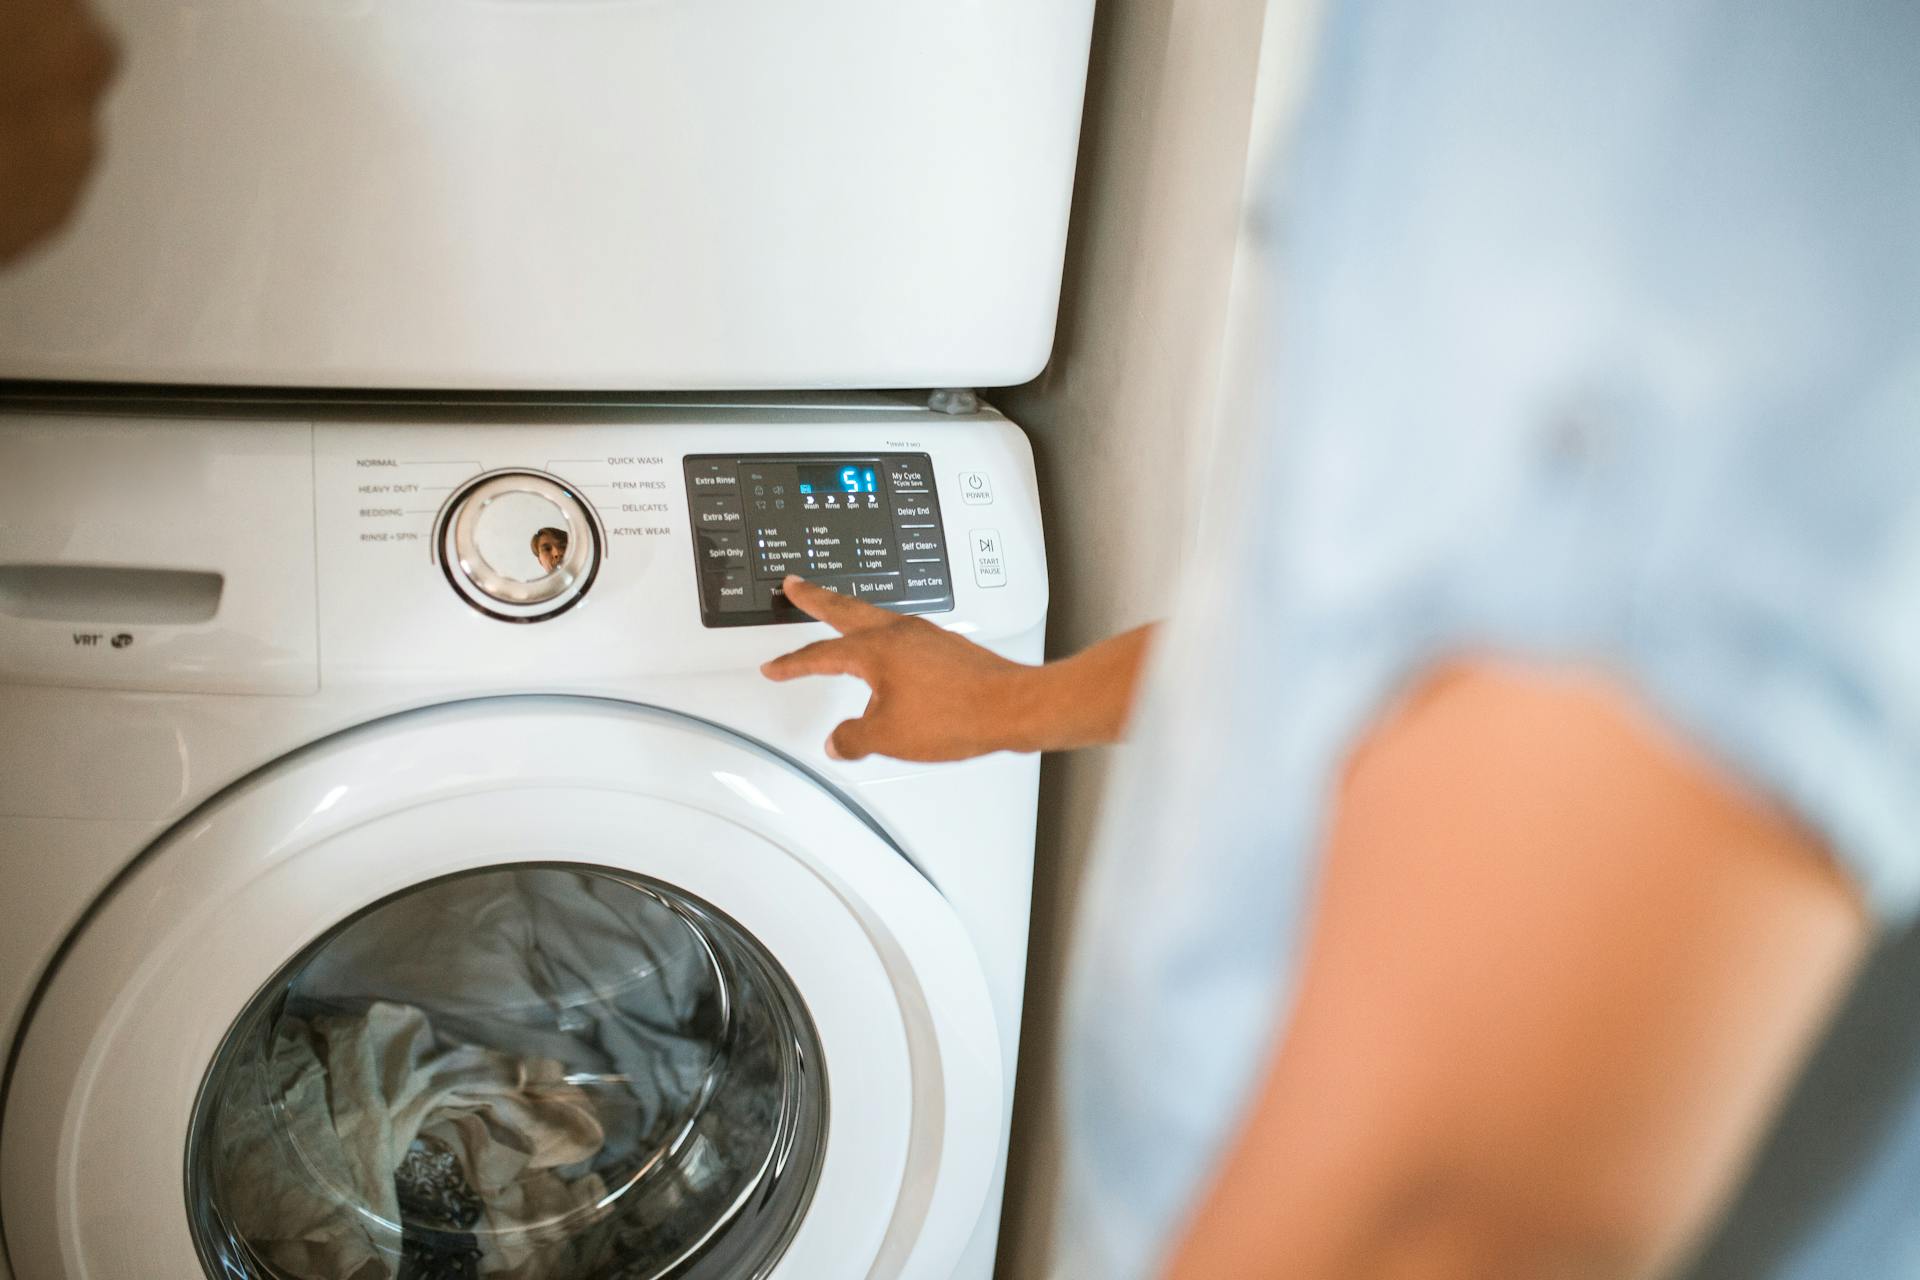 A person using a washing machine | Source: Pexels